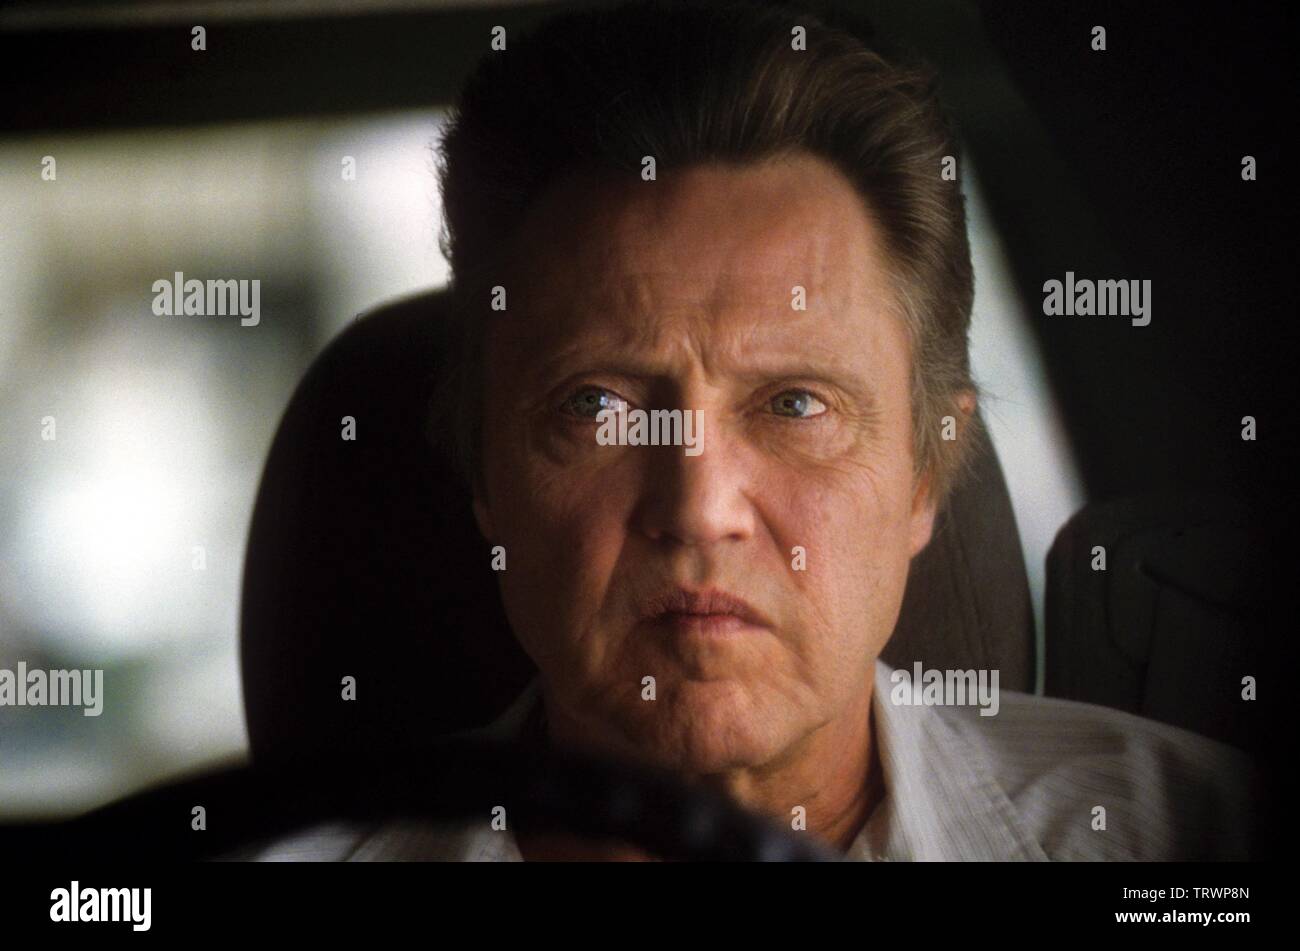 CHRISTOPHER WALKEN in MAN ON FIRE (2004). Copyright: Editorial use only. No  merchandising or book covers. This is a publicly distributed handout.  Access rights only, no license of copyright provided. Only to